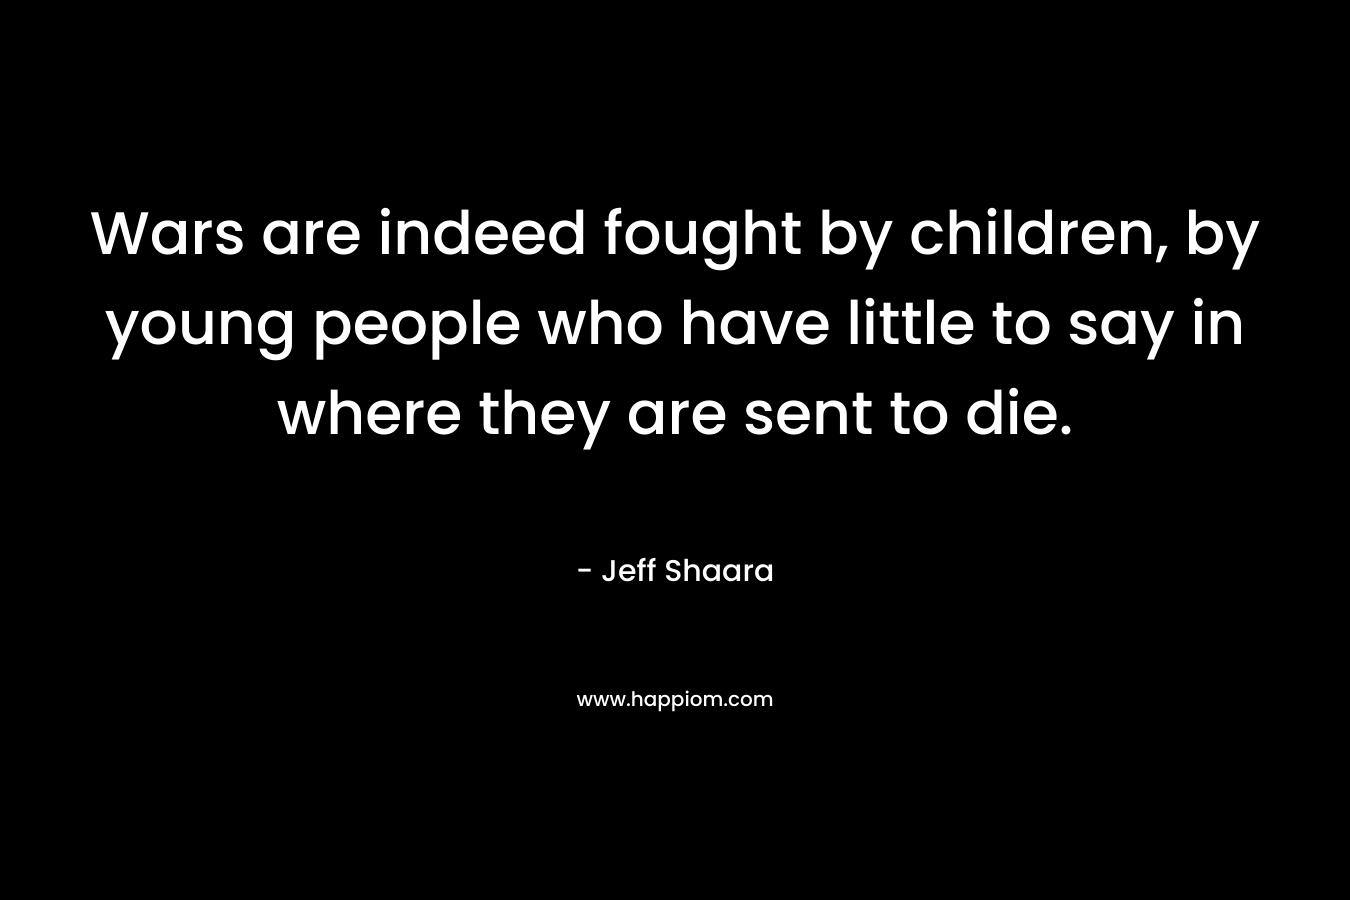 Wars are indeed fought by children, by young people who have little to say in where they are sent to die. – Jeff Shaara